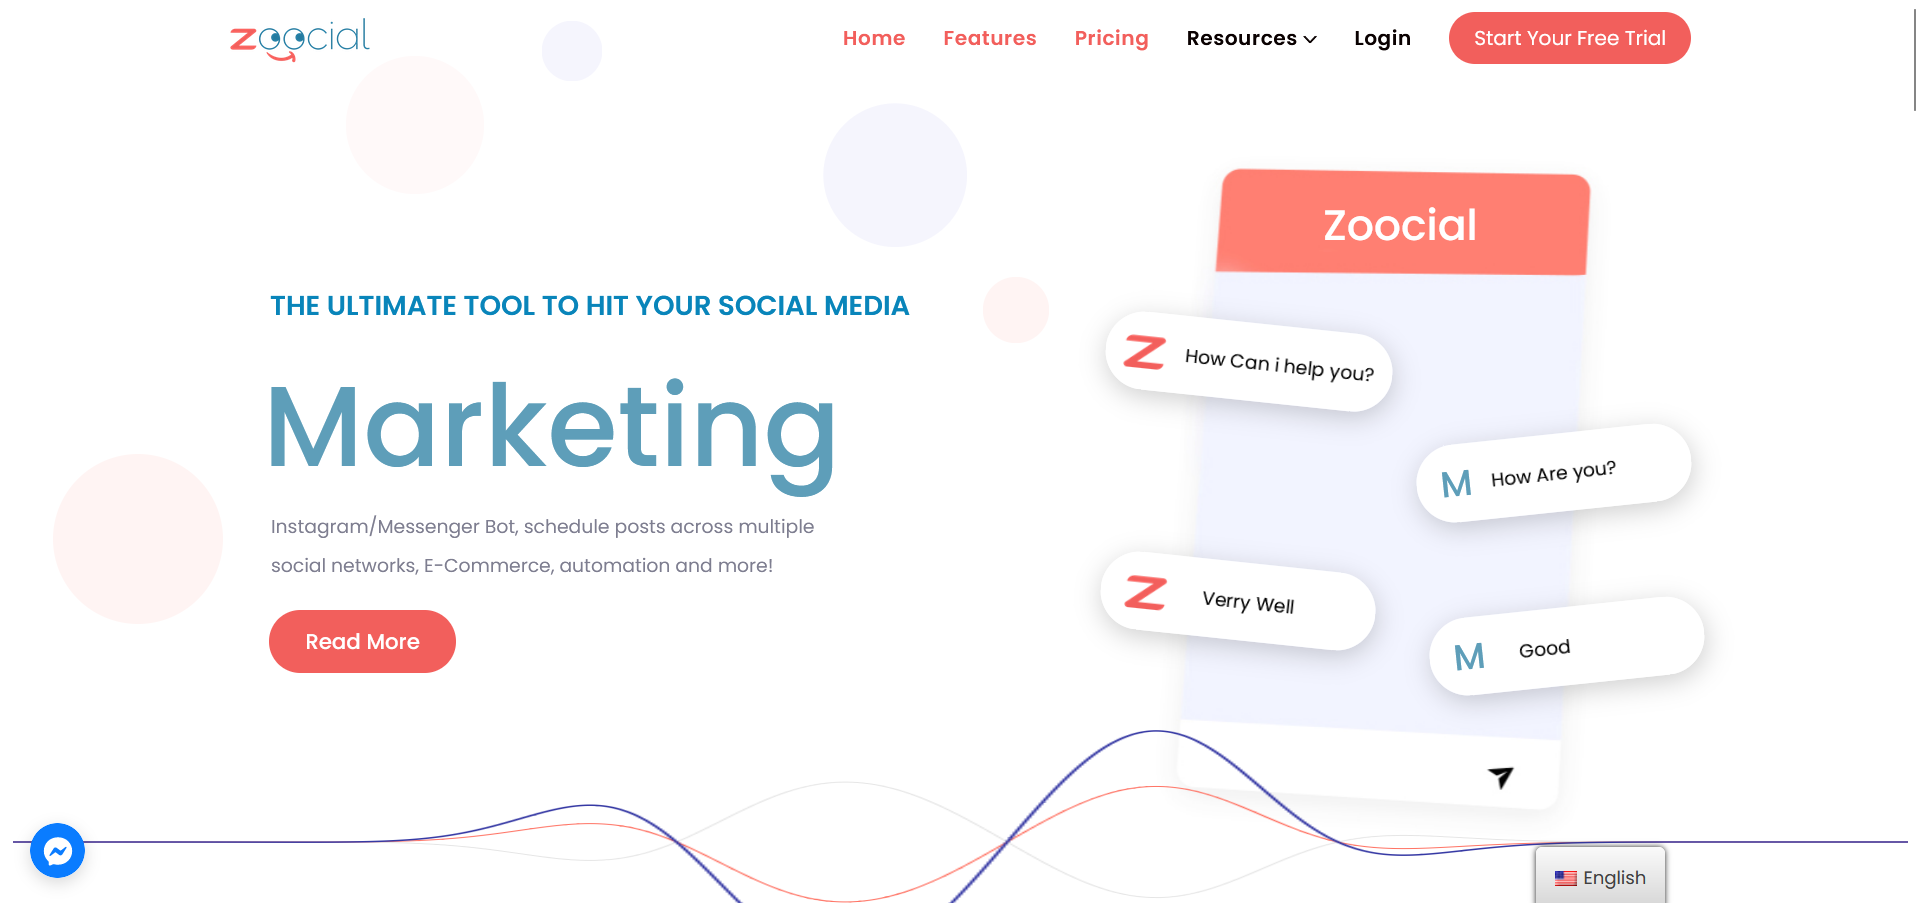 ZoocialA software that automates various tasks in digital marketing campaigns